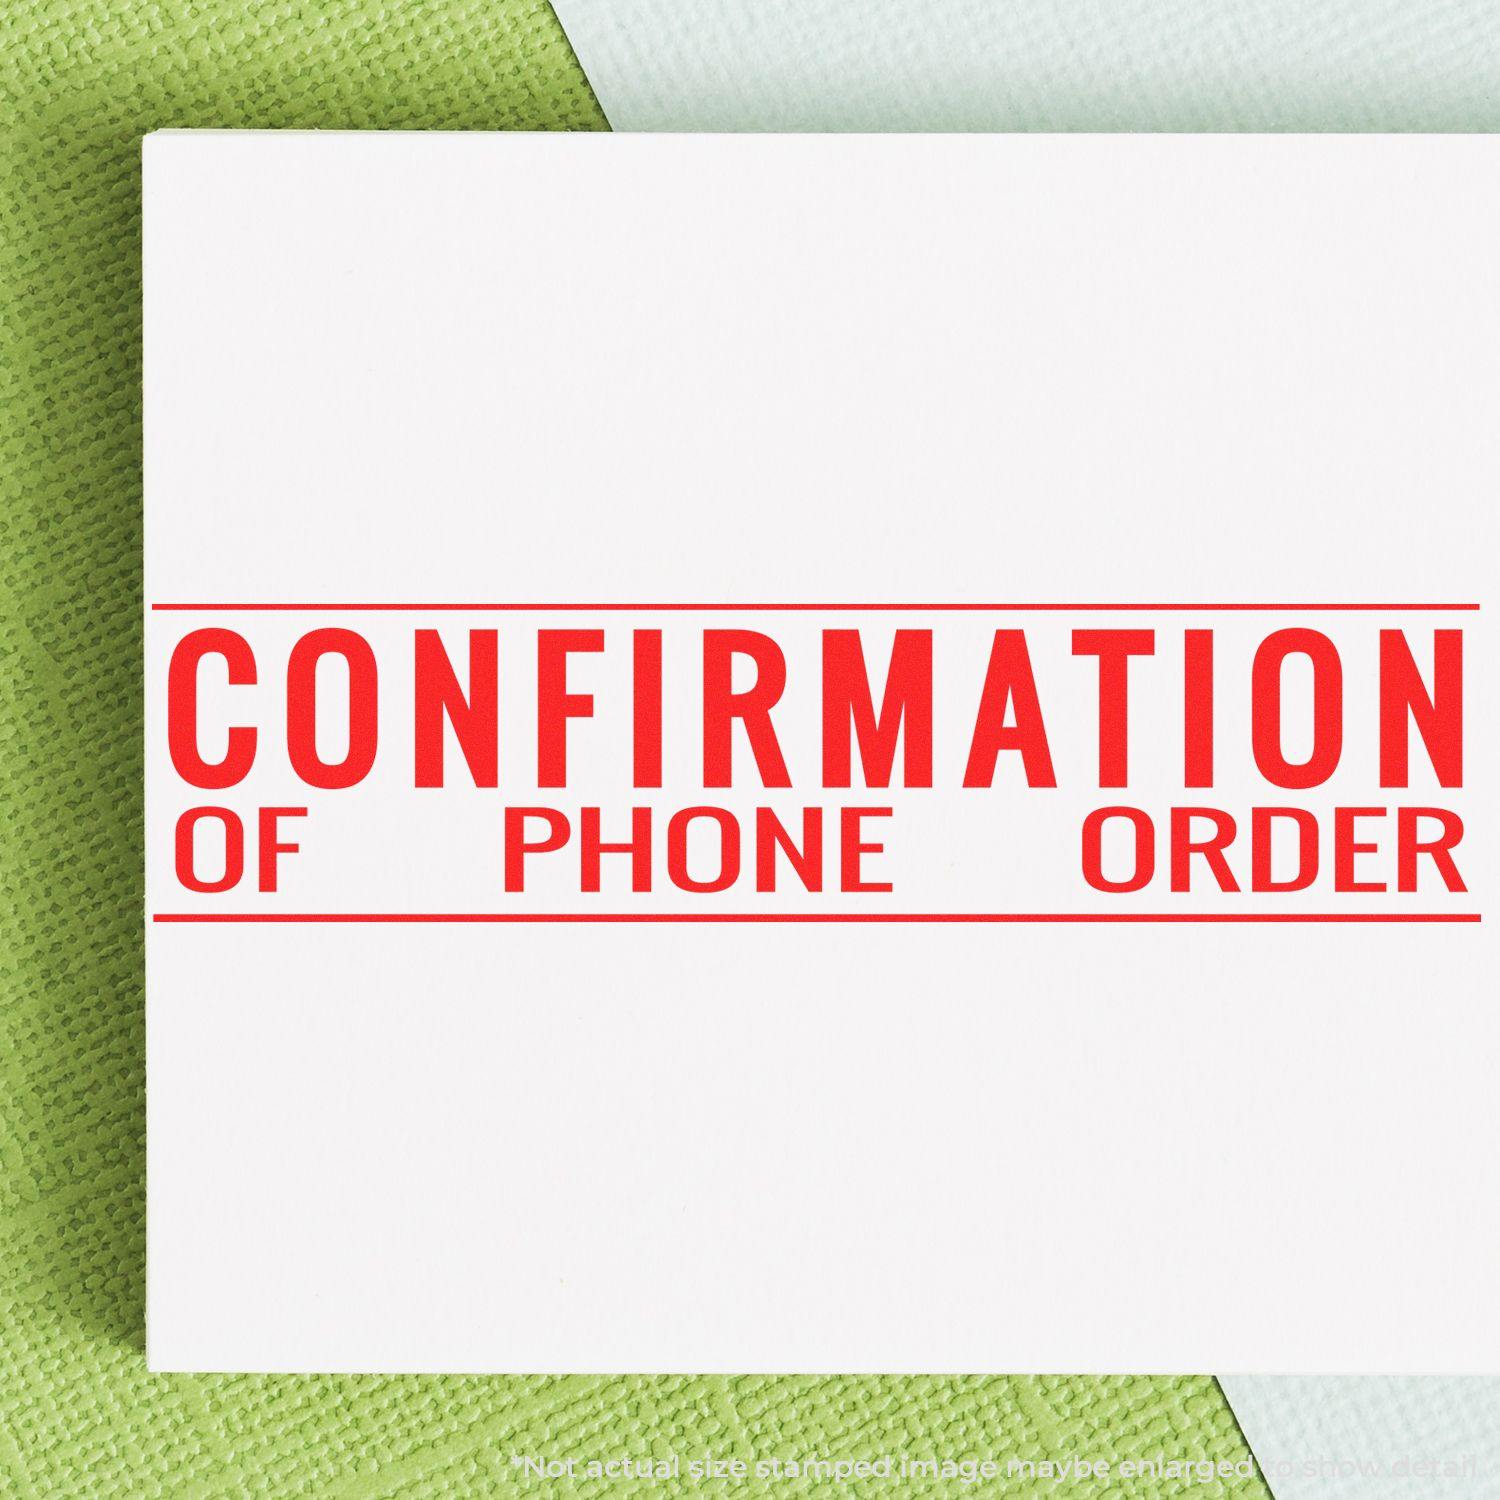 A self-inking stamp with a stamped image showing how the text "CONFIRMATION OF PHONE ORDER" in a large font with two horizontal lines above and under the text is displayed after stamping.